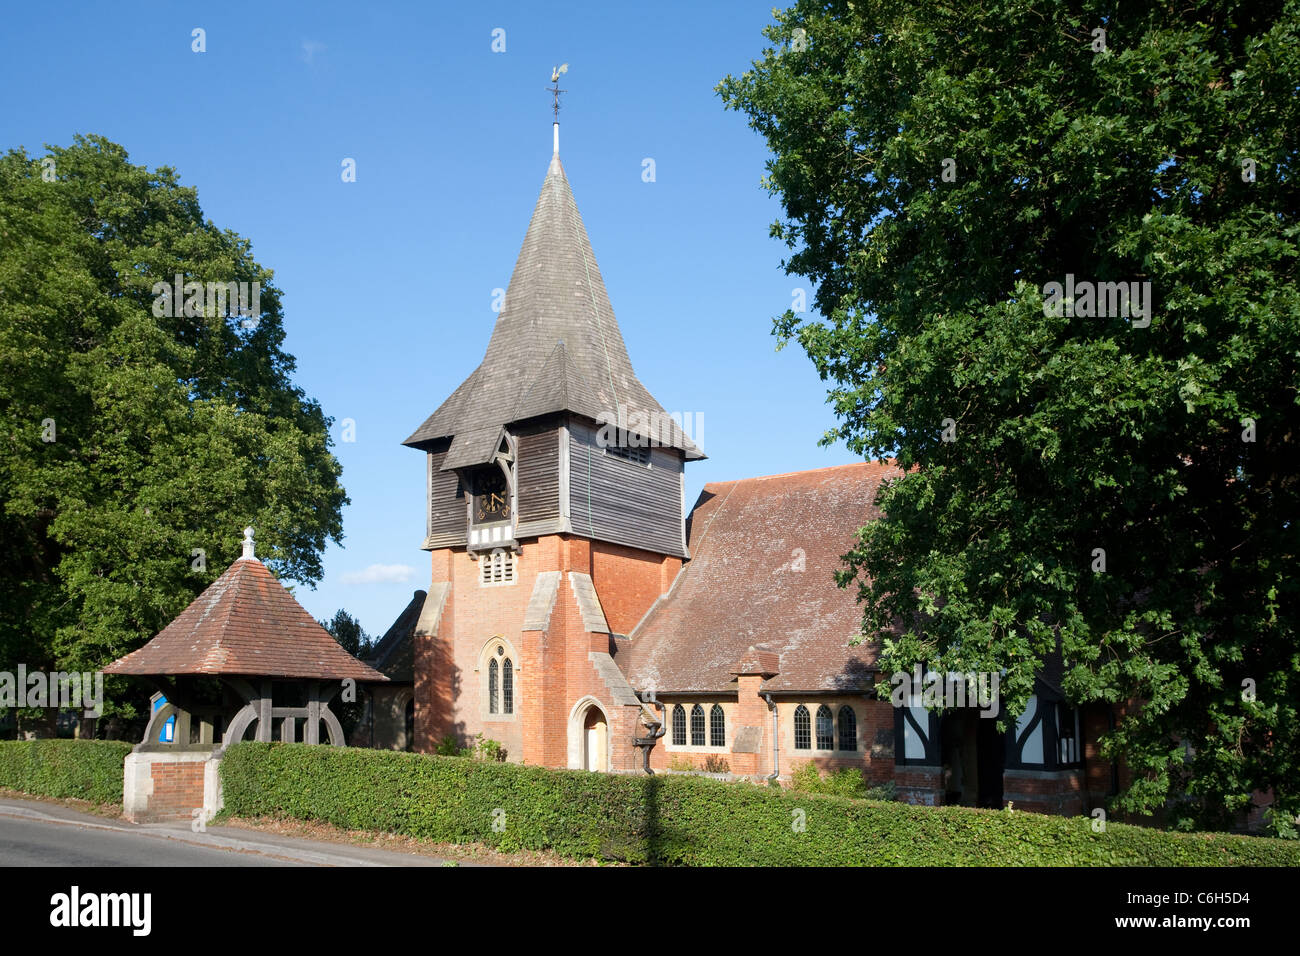 St Peter's Church, Stonegate, East Sussex, England, UK Stock Photo